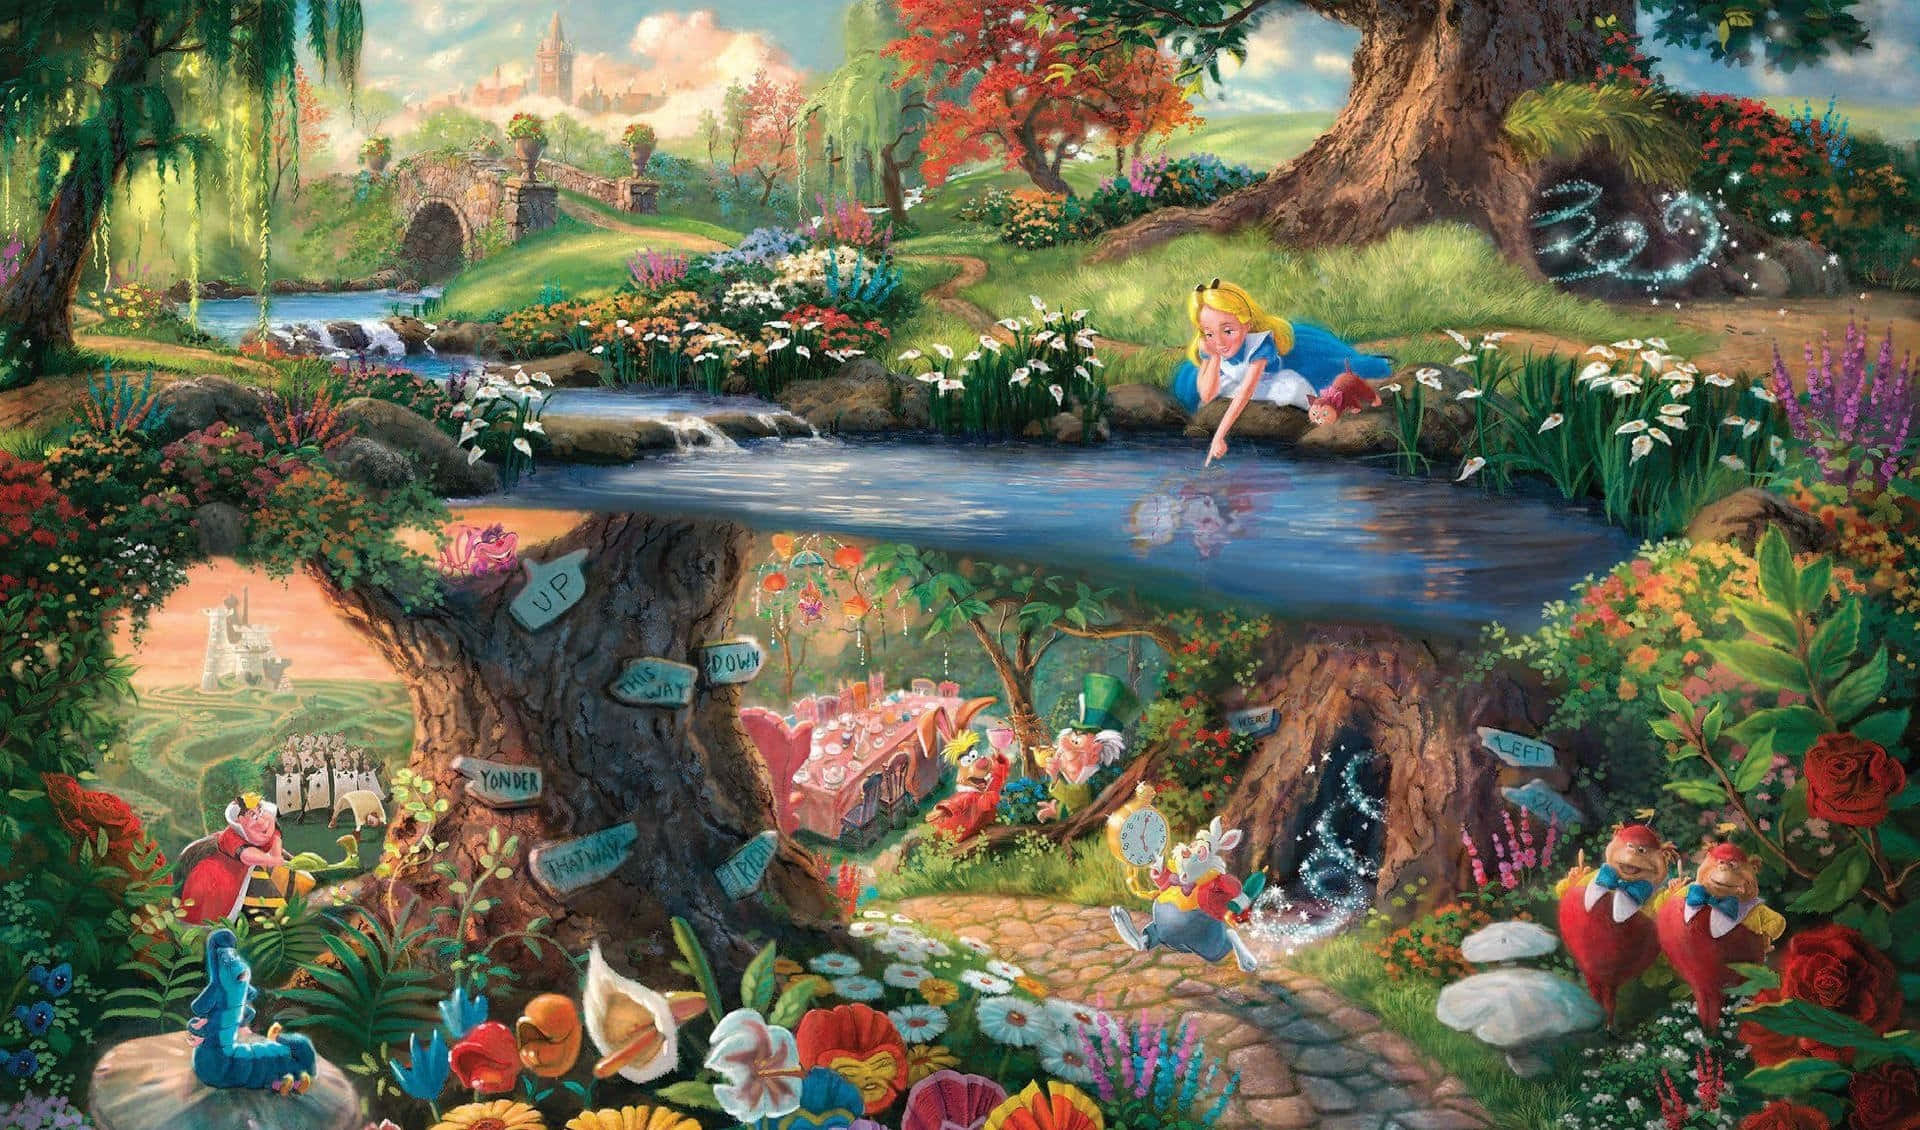 Alice falling down the rabbit hole